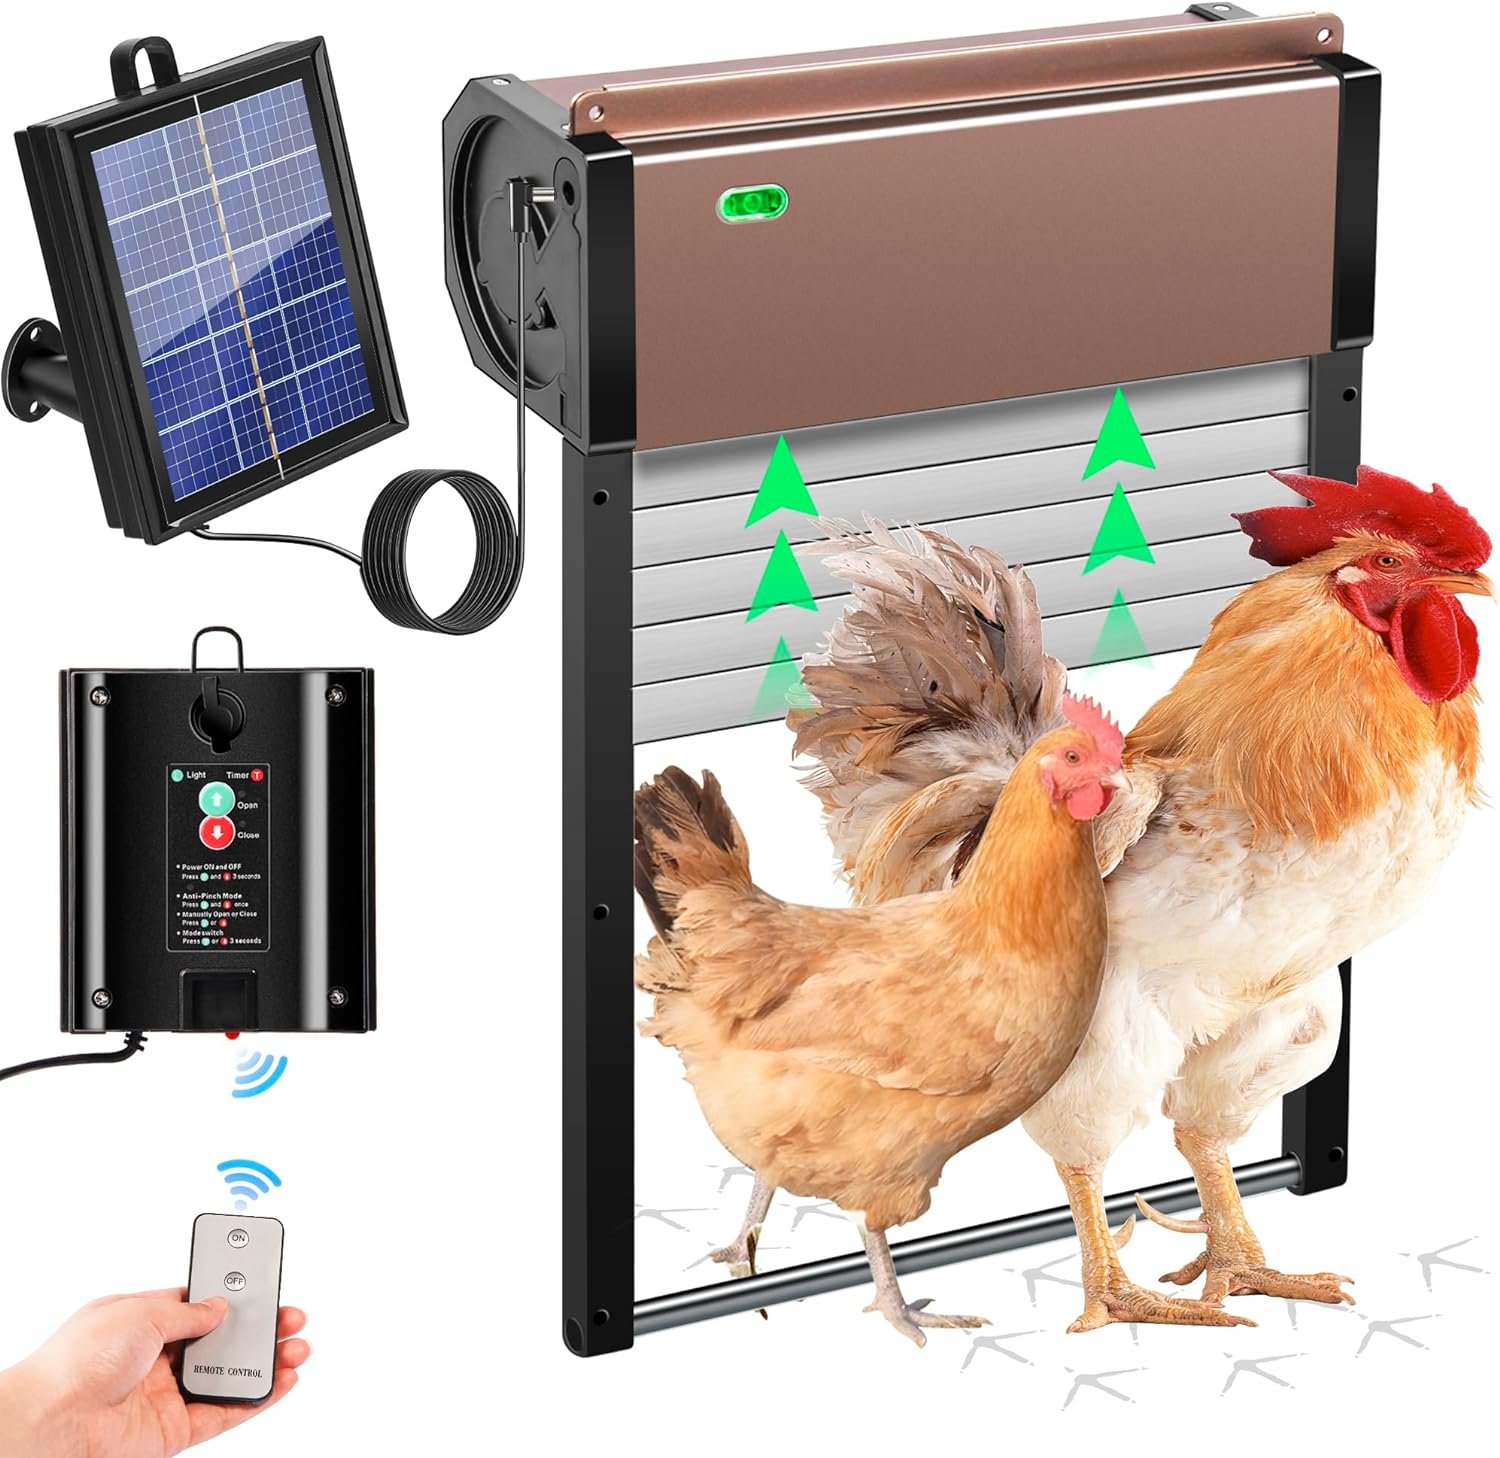 Automatic Chicken Coop Door - Solar Chicken Door with Timer, Light Sensor, Anti-Trap, Remote Control, Full Aluminum and Weatherproof, Anti-Pinch Design for Chickens Ducks Farms